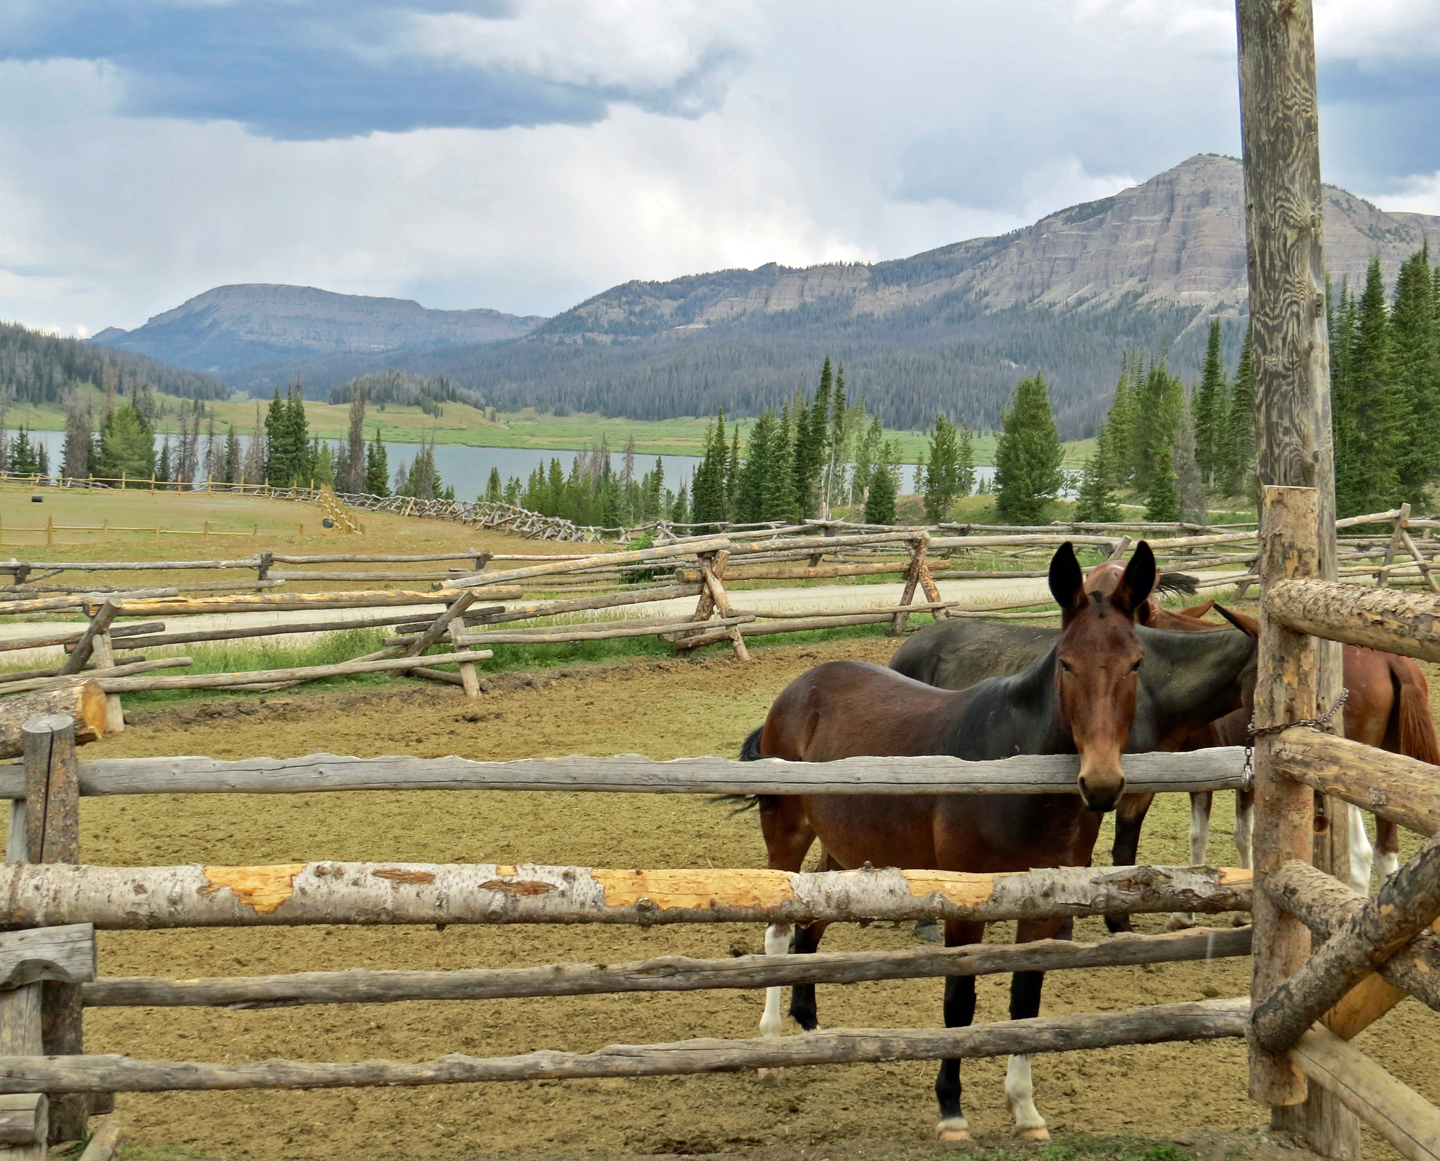 The beloved herd of horses at Brooks Lake Lodge take guests on spectacular backcountry trail rides through the property’s breathtaking natural surroundings.